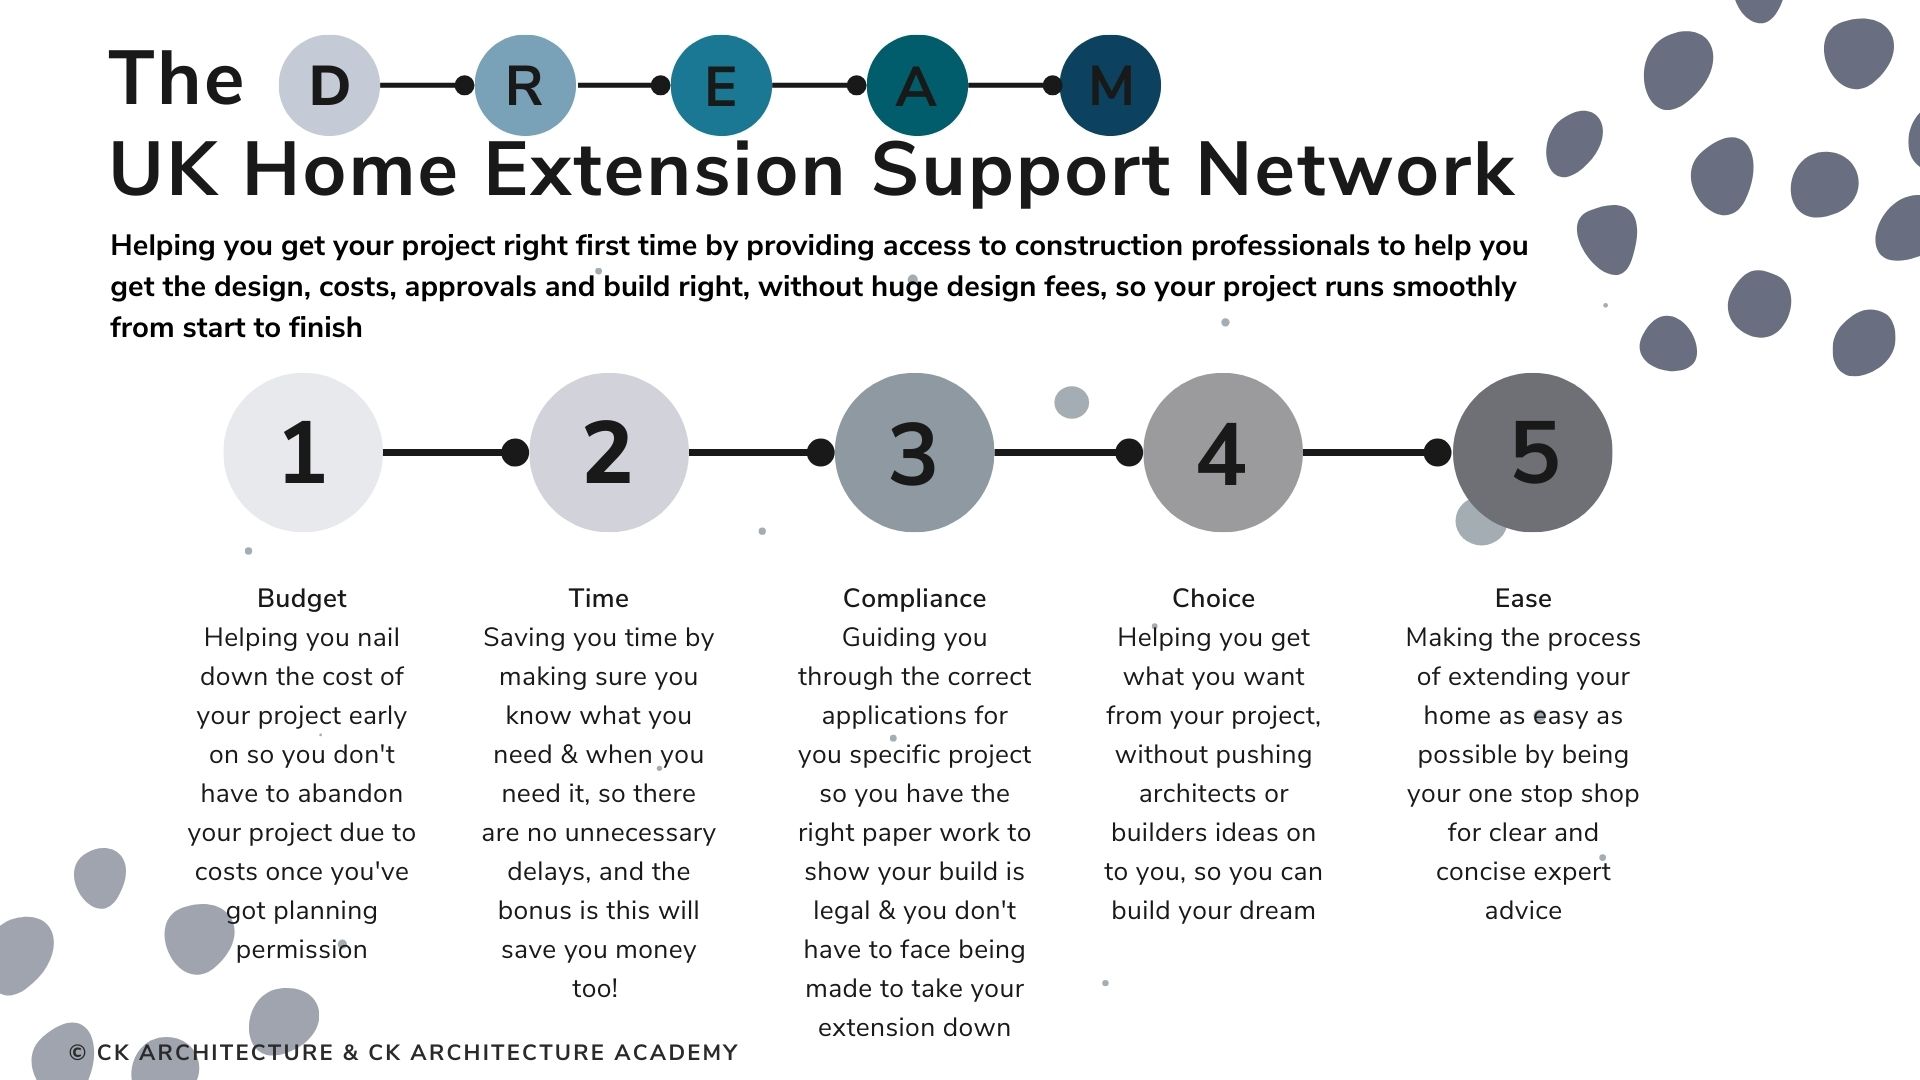 D.R.E.A.M UK home Extension Support Network